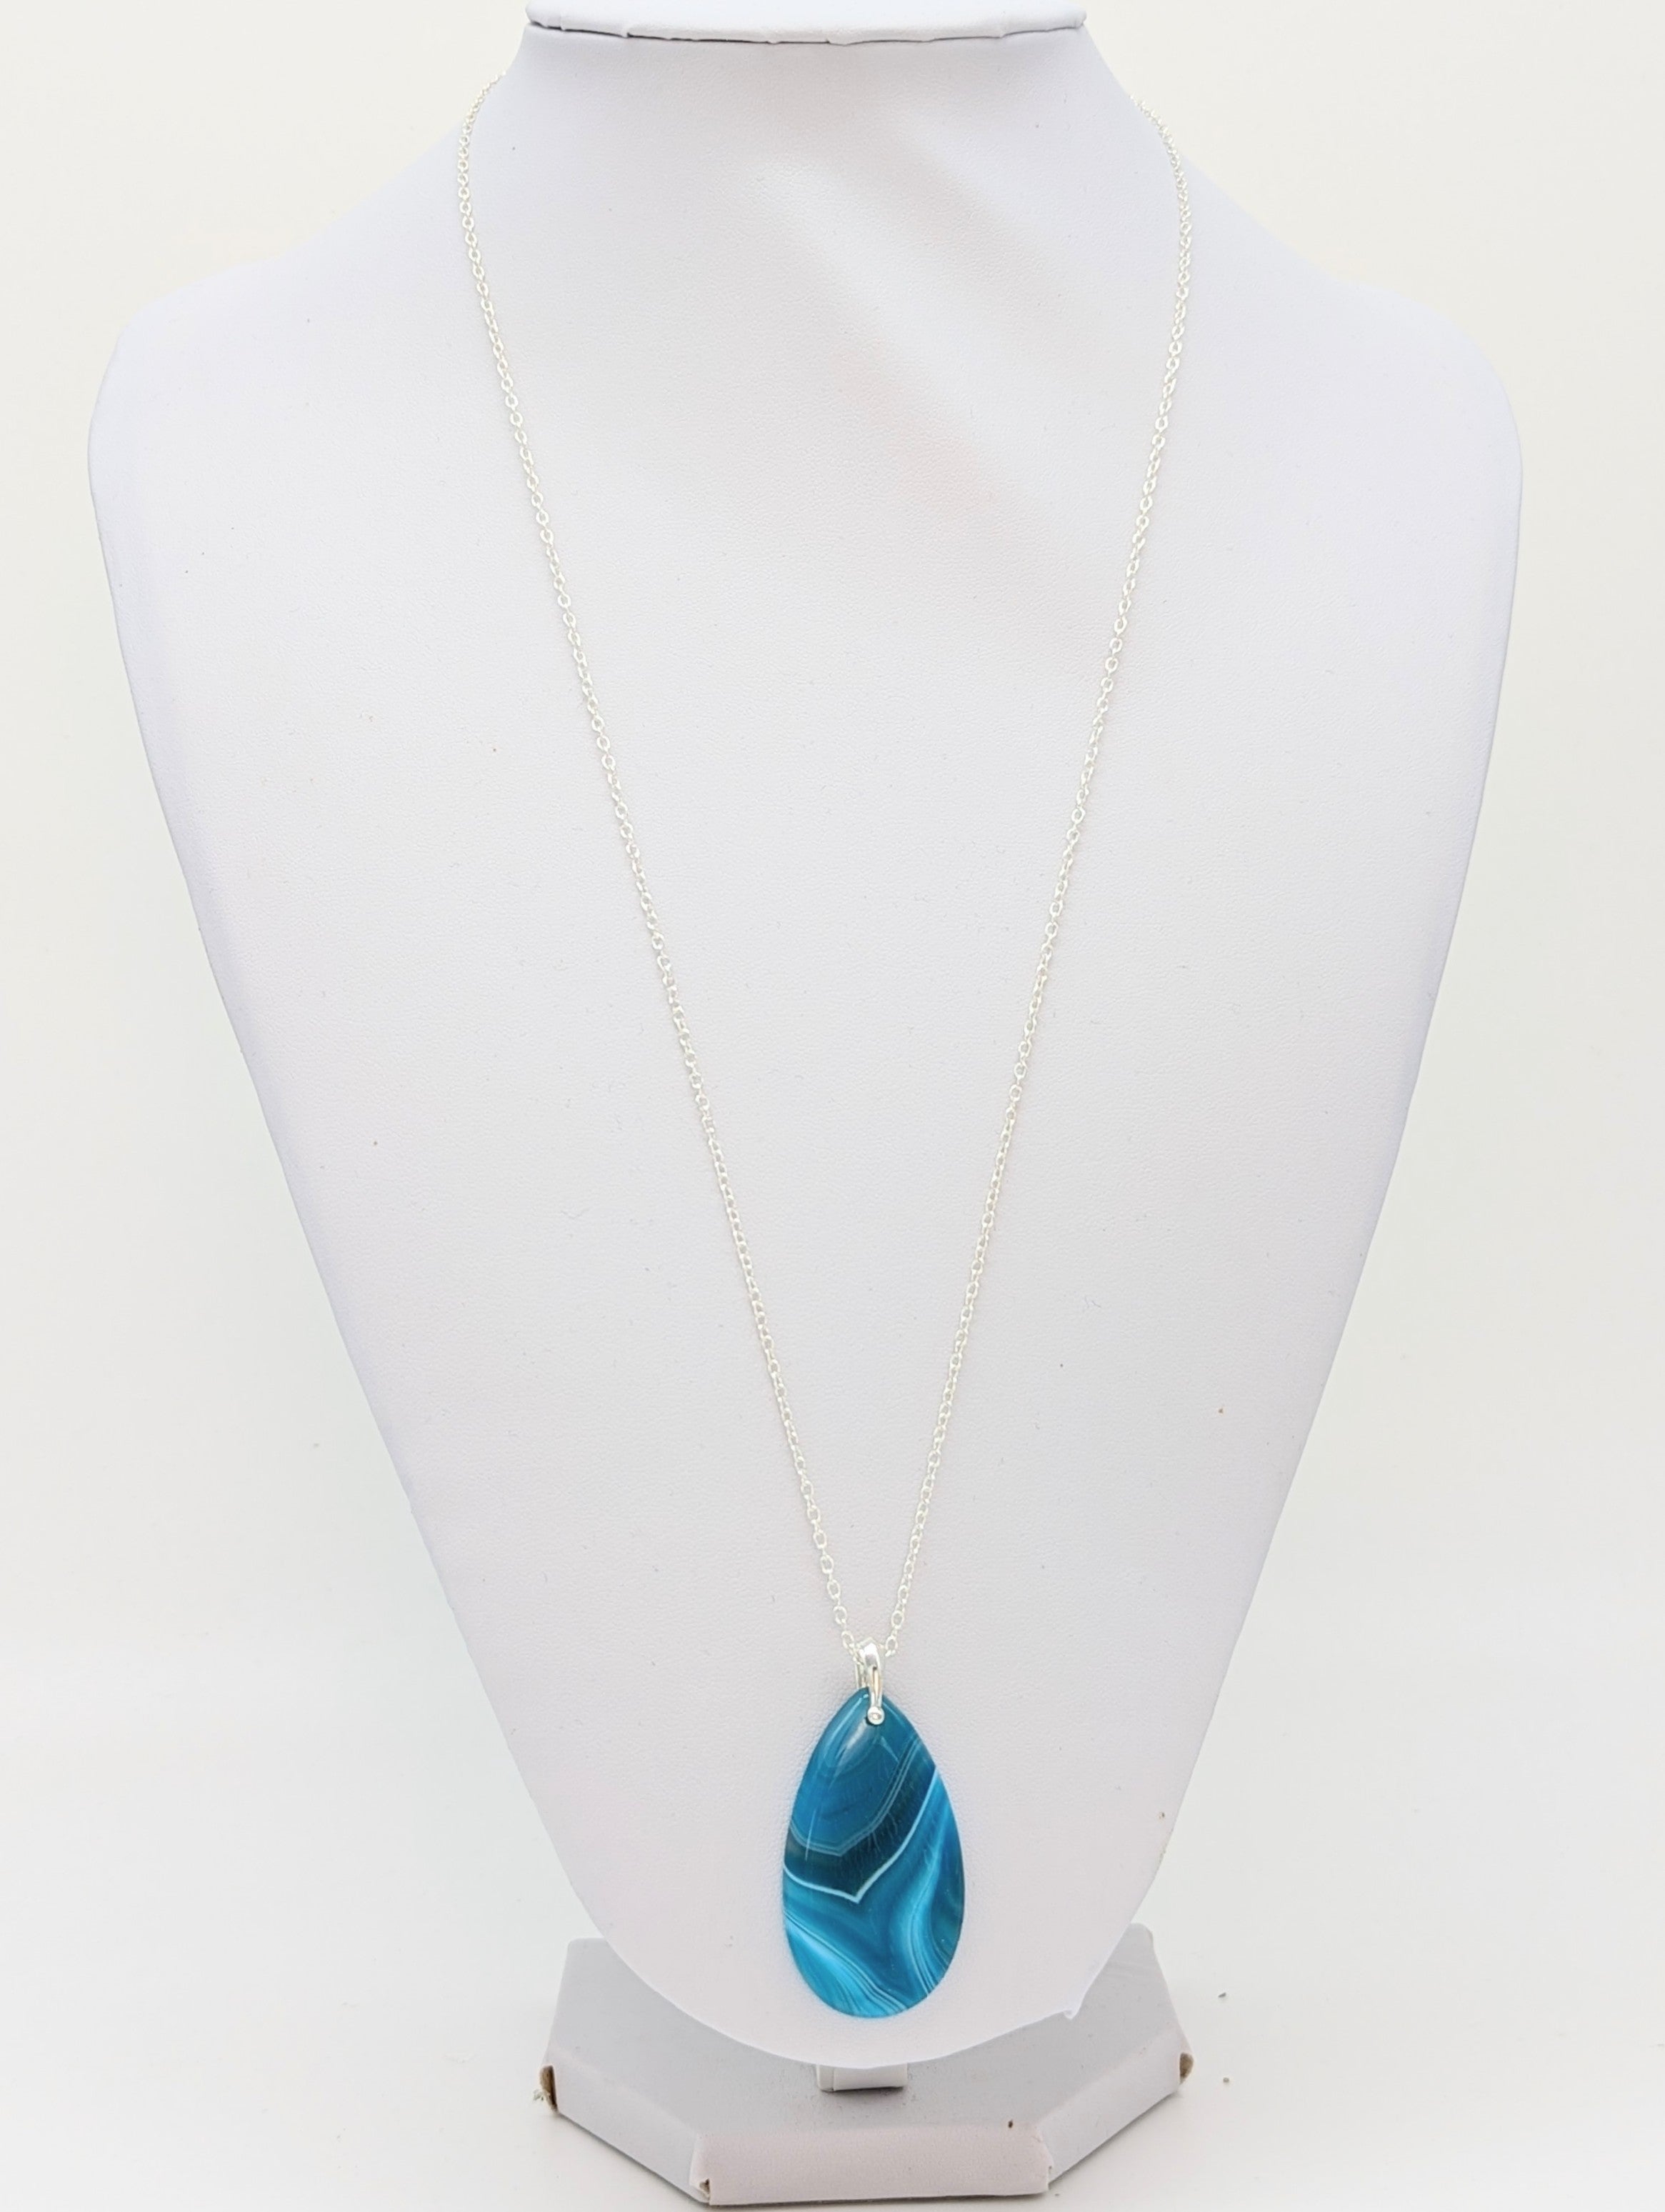 Blue Agate Necklace on Sterling Silver Bail and Chain